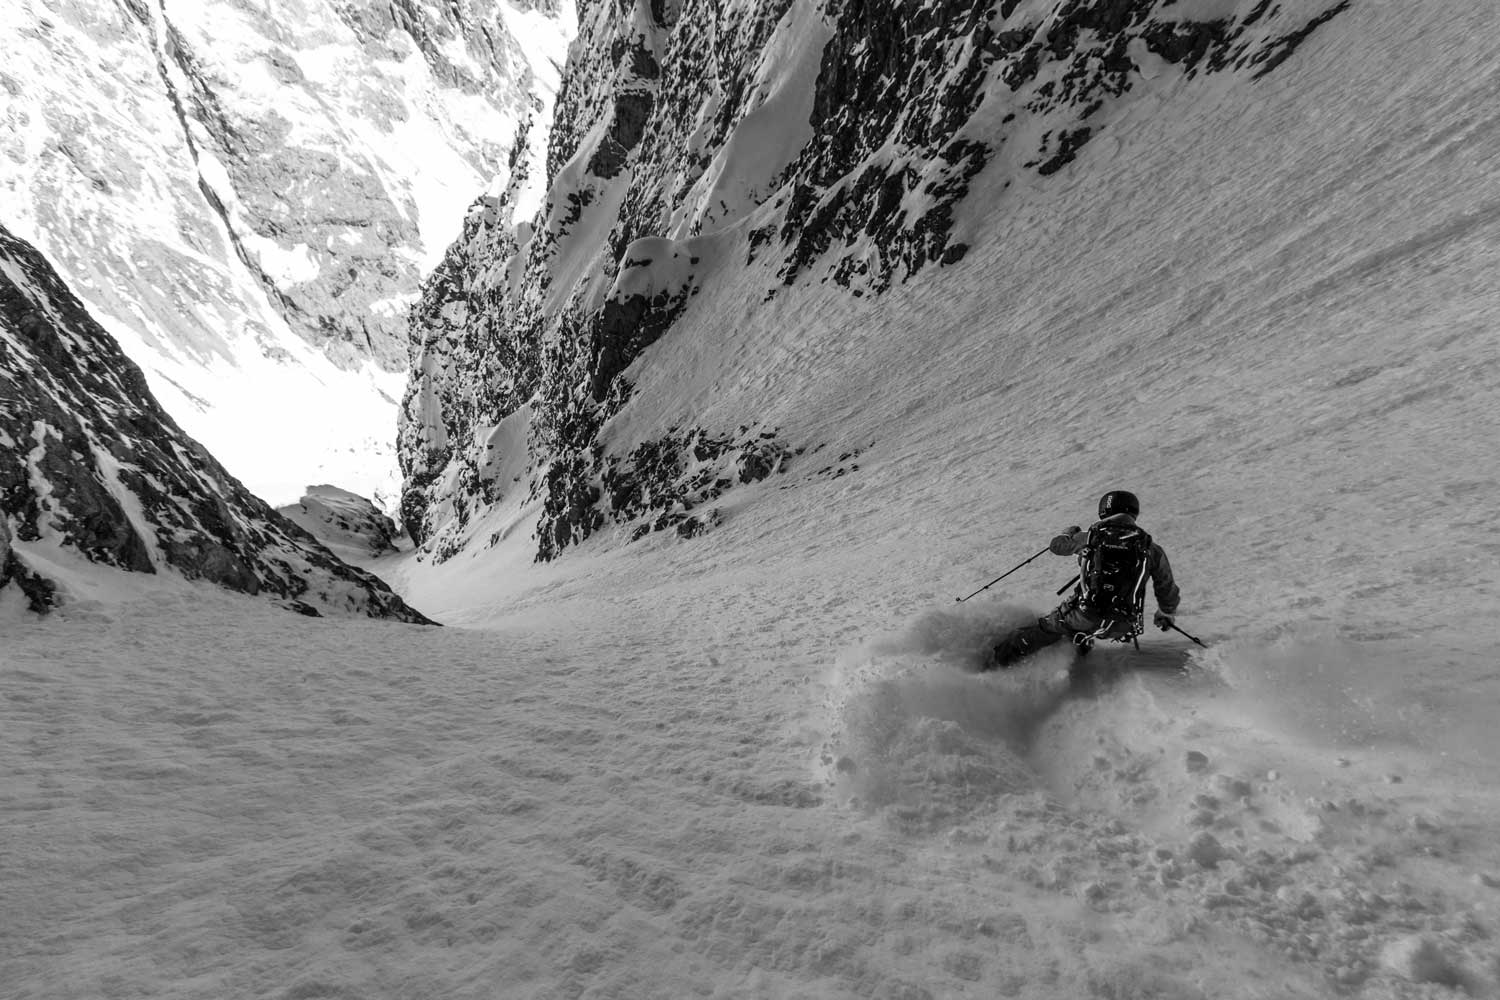 Skiing the couloir of Pelas Verney.